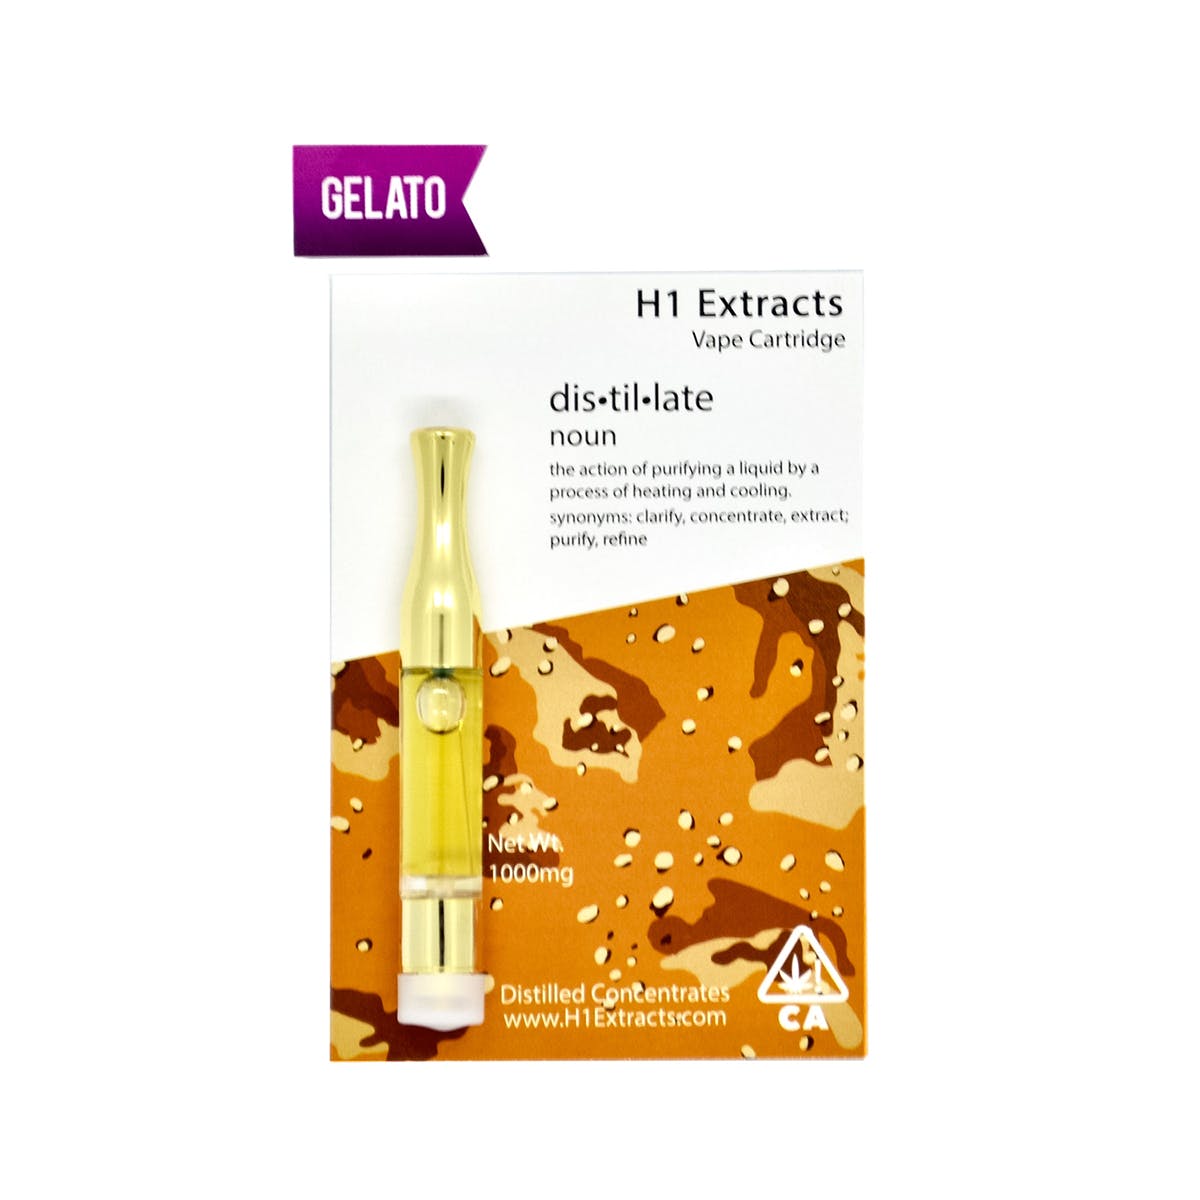 concentrate-h1-extracts-classic-gelato-cartridge